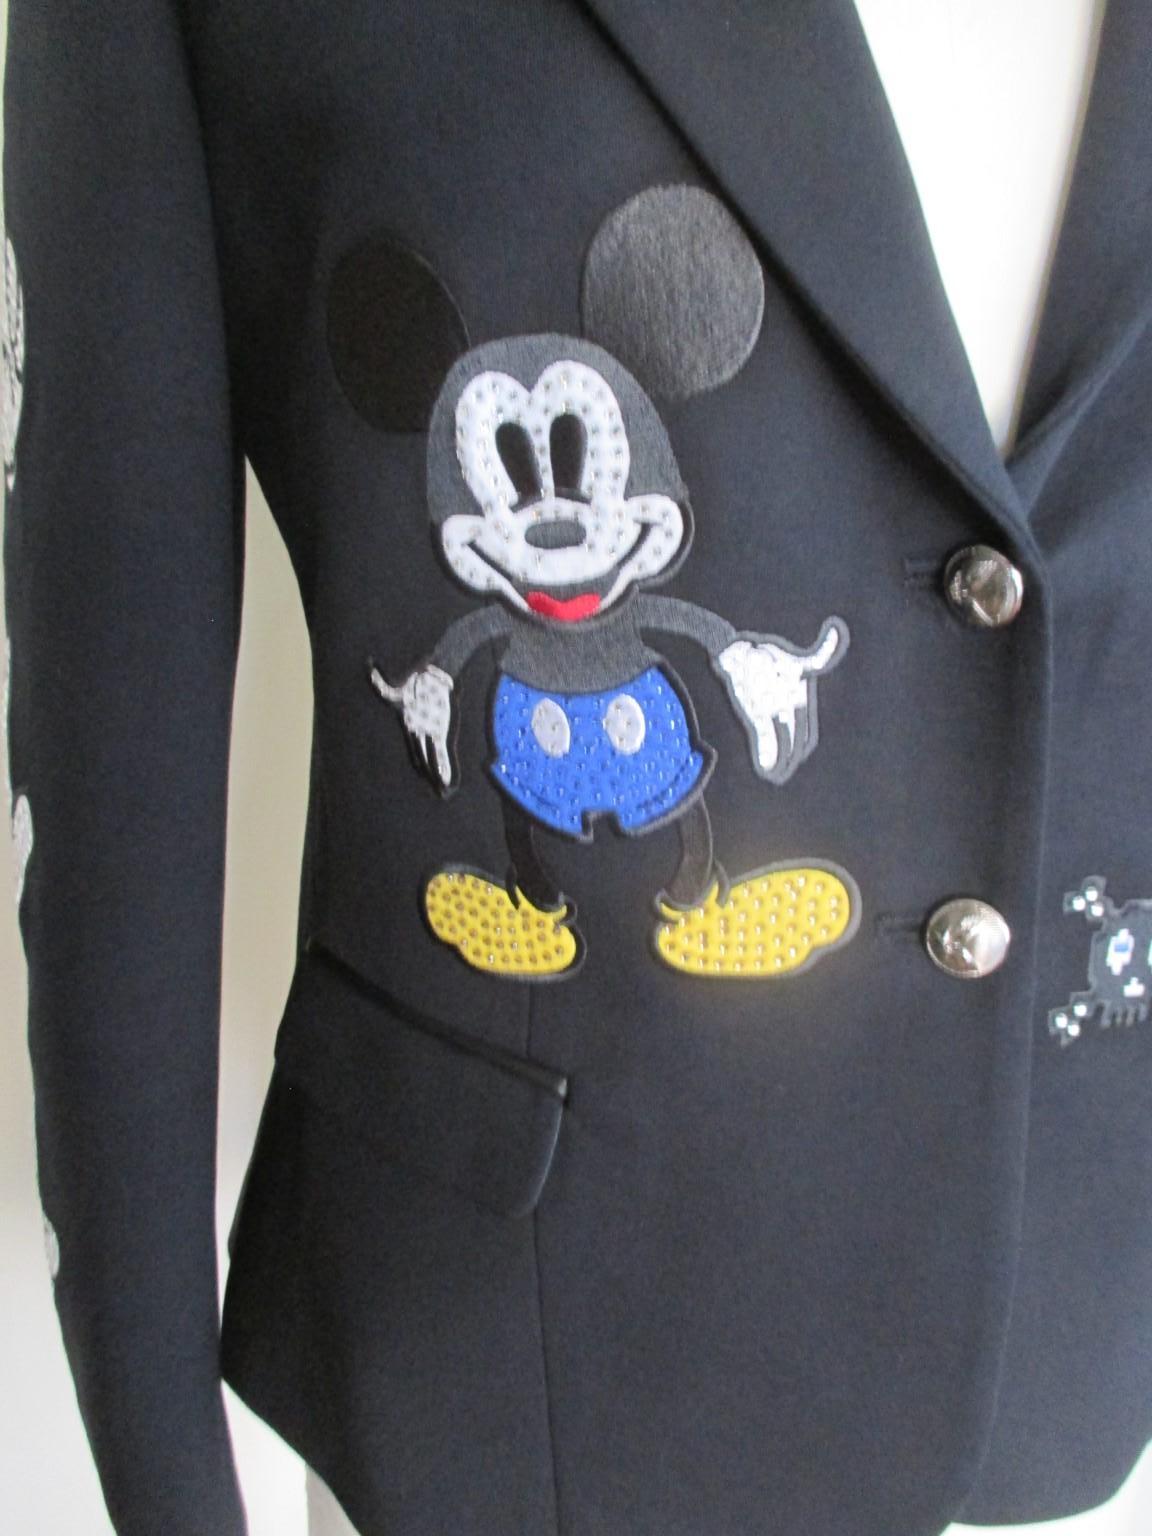 This PP couture collectable jacket is designed with Mickey Mouse and other glitter items.

We offer more Gucci, Hermes and exclusive Fur items, view our frontstore.

Details:,
2 buttons
2 pockets
Fully lined
The size is mentioned Italy 38 / is about